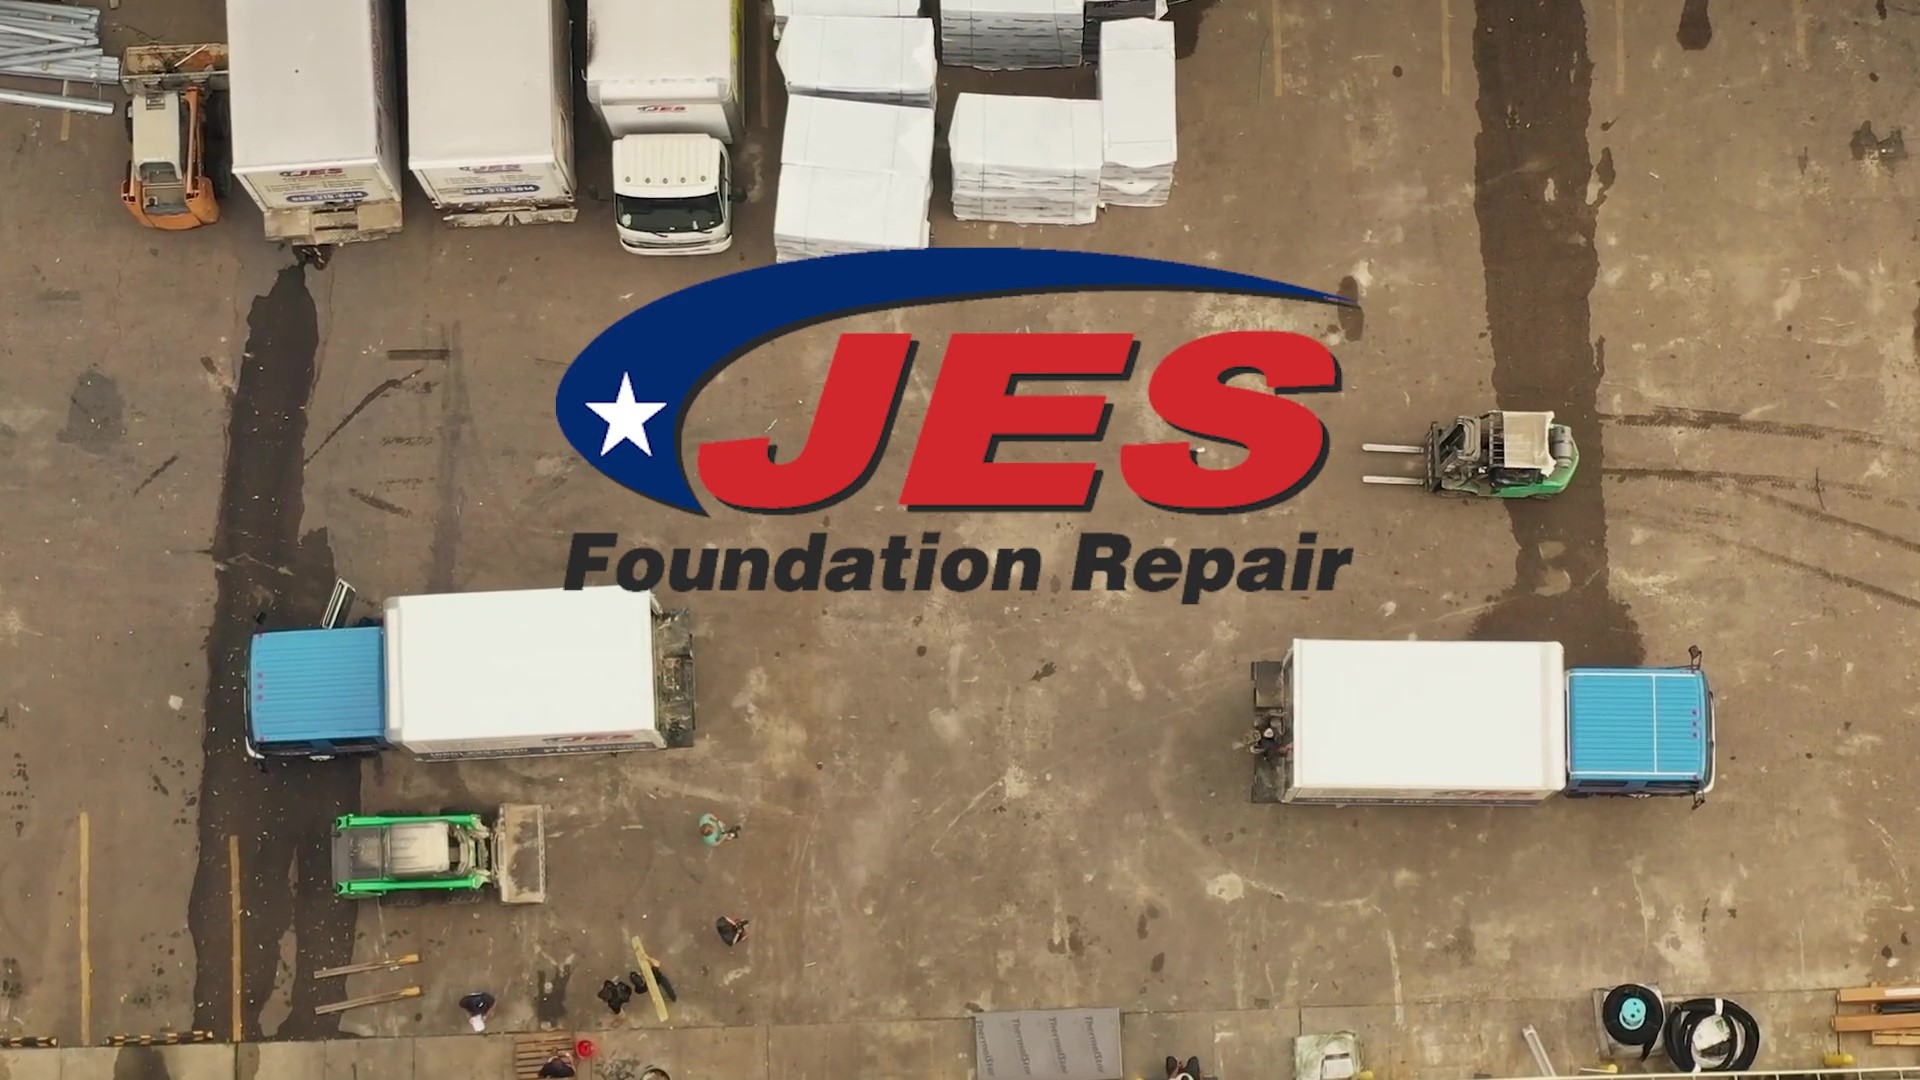 JES has been keeping homeowners in Virginia, Maryland, and DC safe for over 25 years!